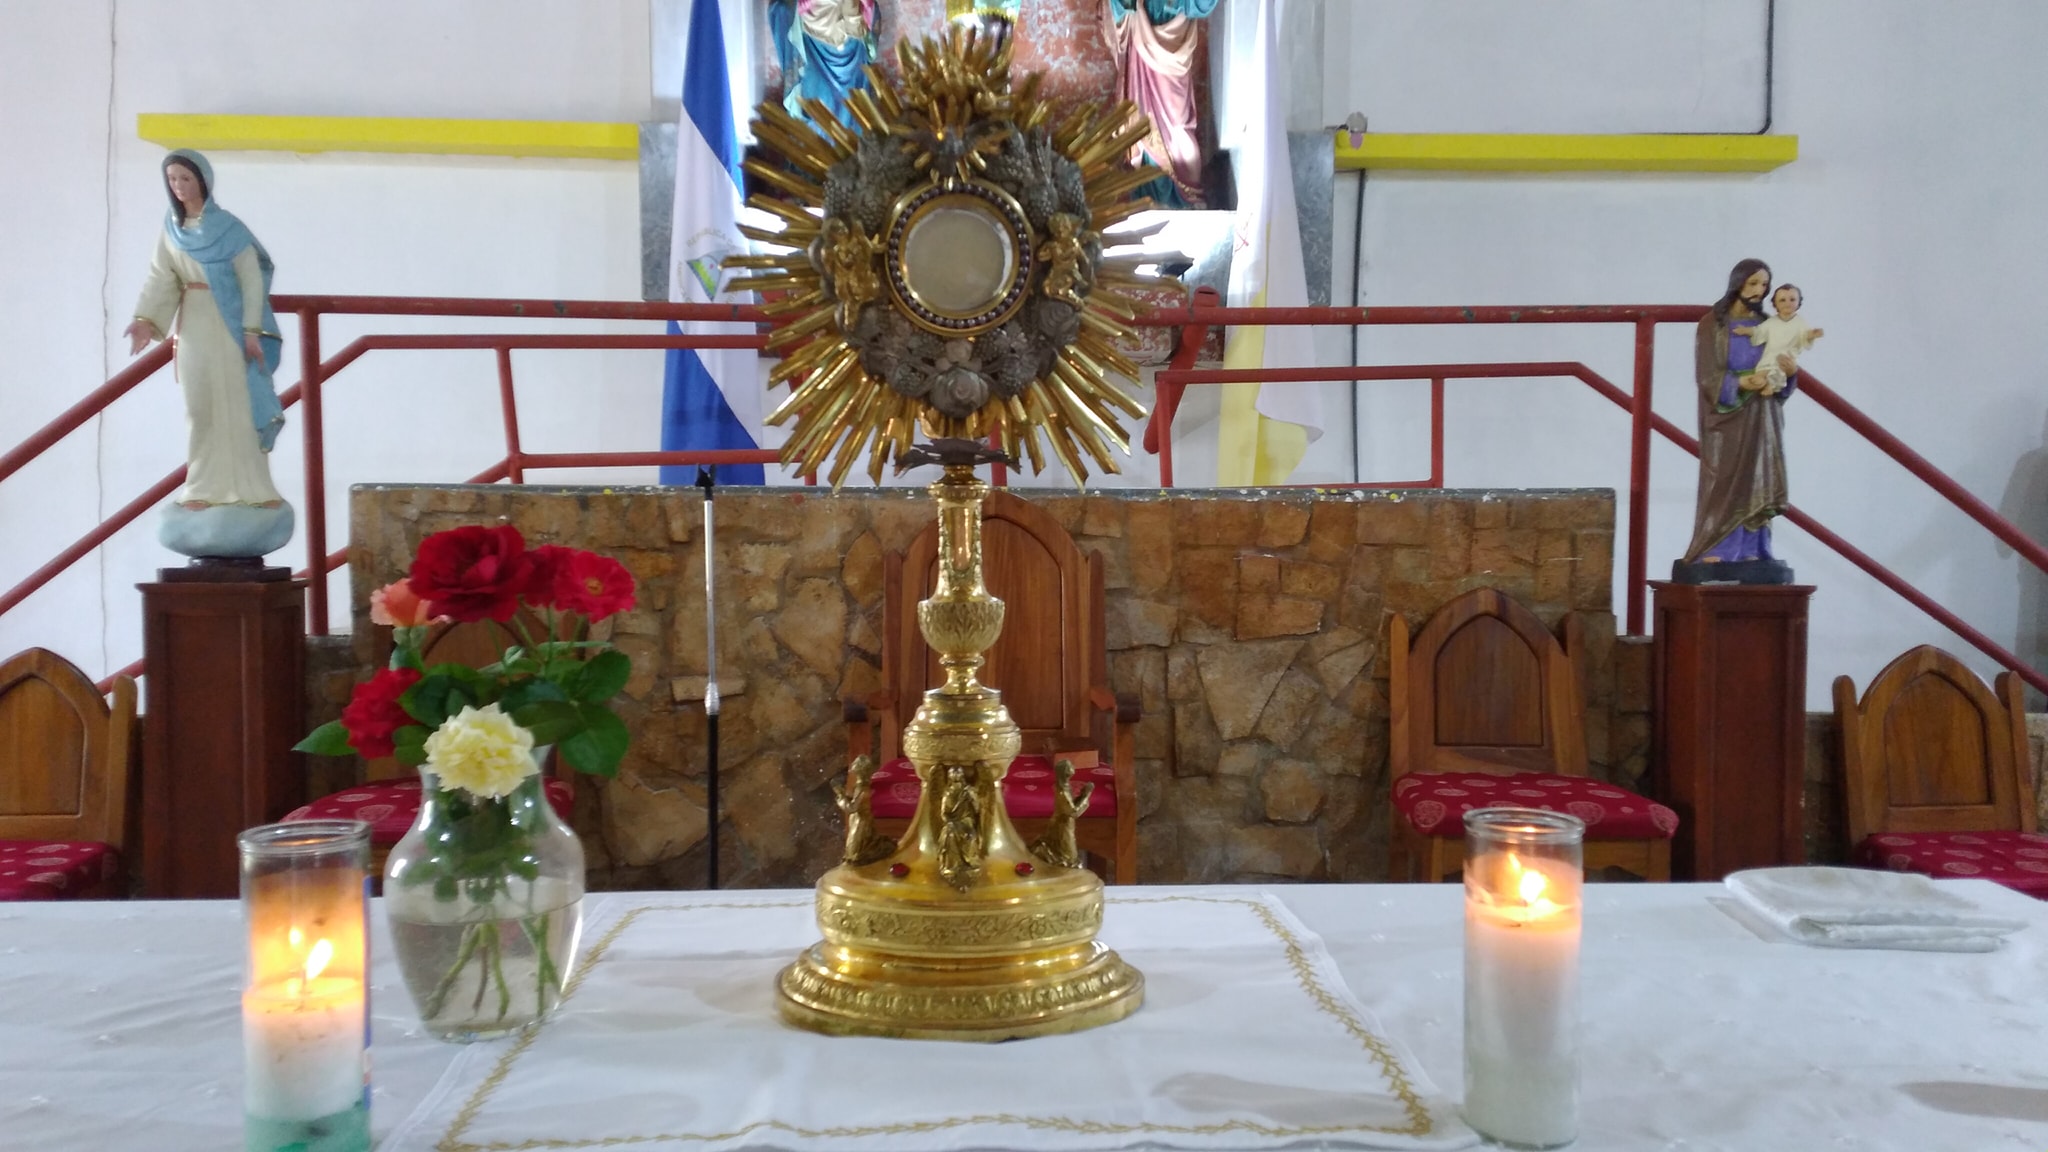 Ortega police order the Archdiocesan Shrine of Our Lord of Esquipulas to cancel charity event